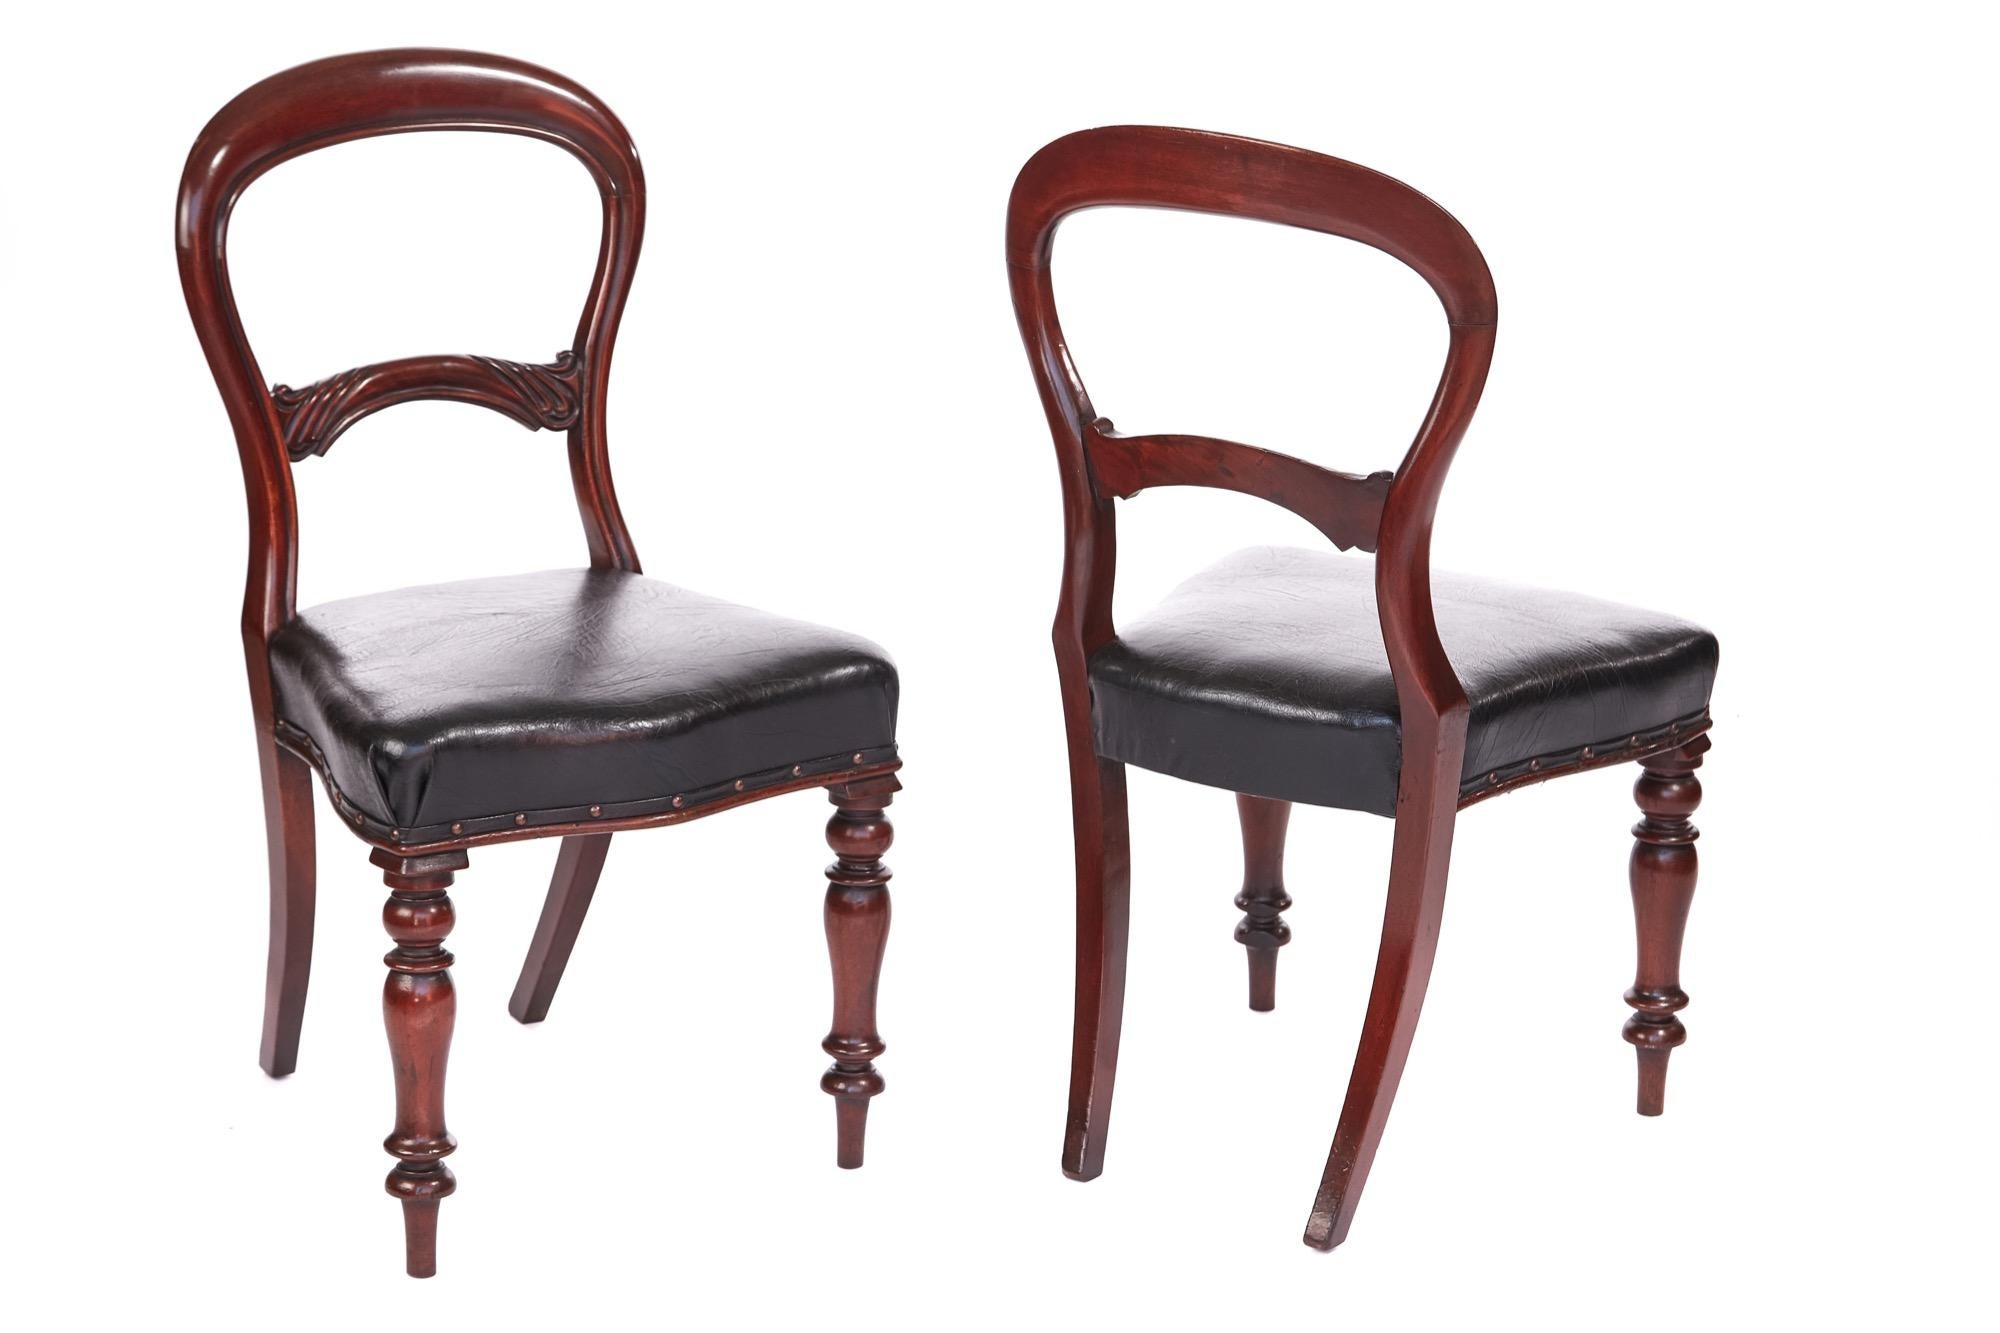 Quality set of six Victorian mahogany balloon back chairs, the circular backs have beautifully carved lower rails standing on shaped front legs and outswept legs to the back. Rich in colour, recently polished and re-upholsterd.

Measures: Seats W